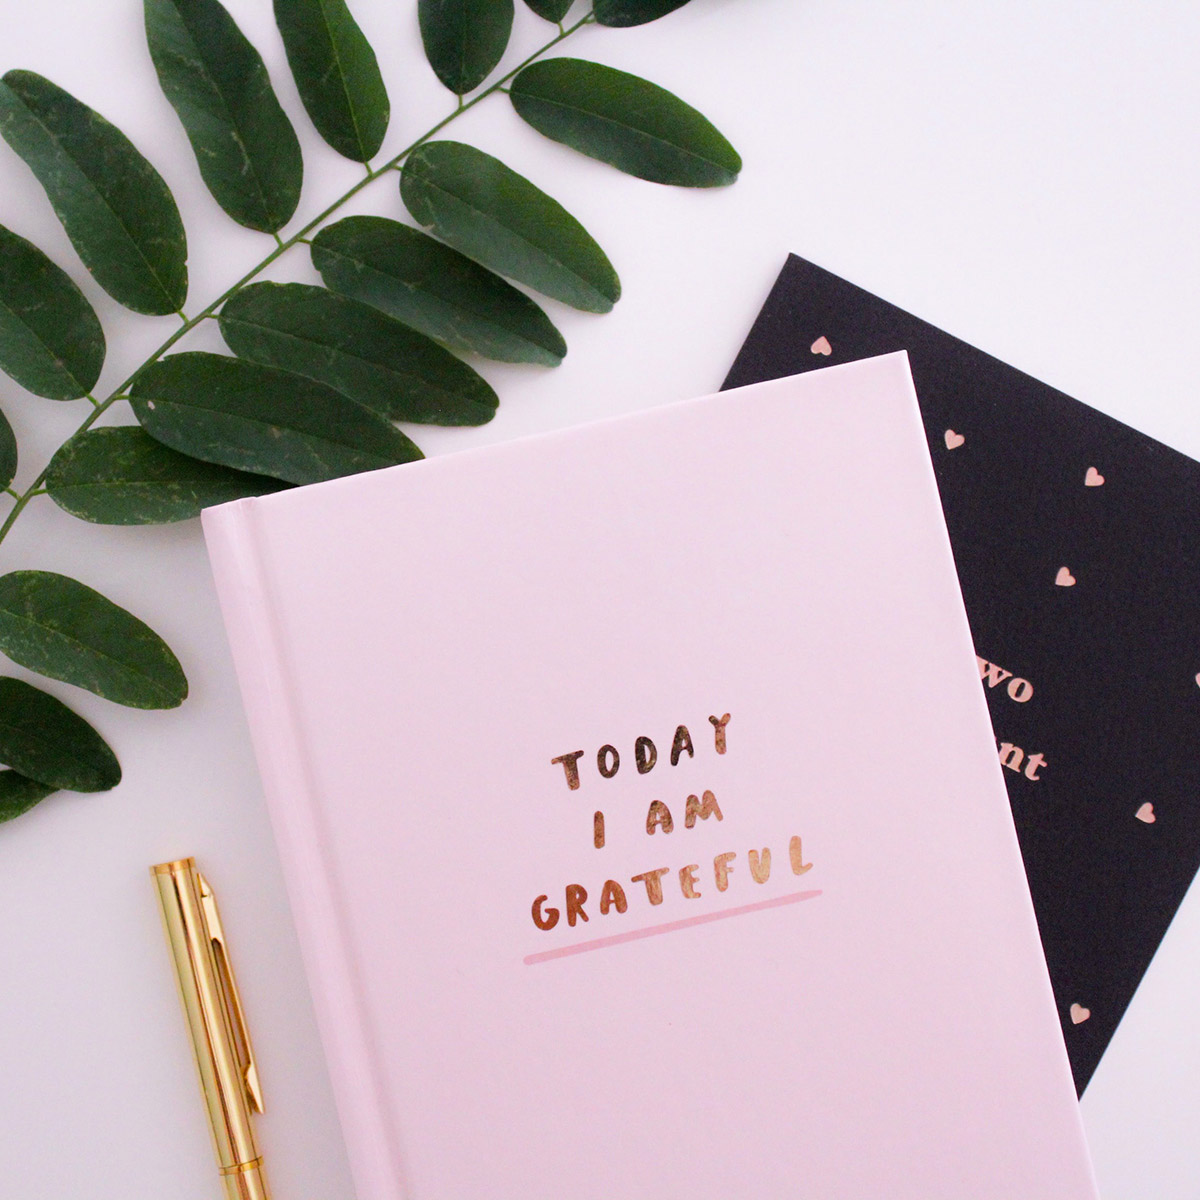 Journal with "Today I am grateful" written on the cover.